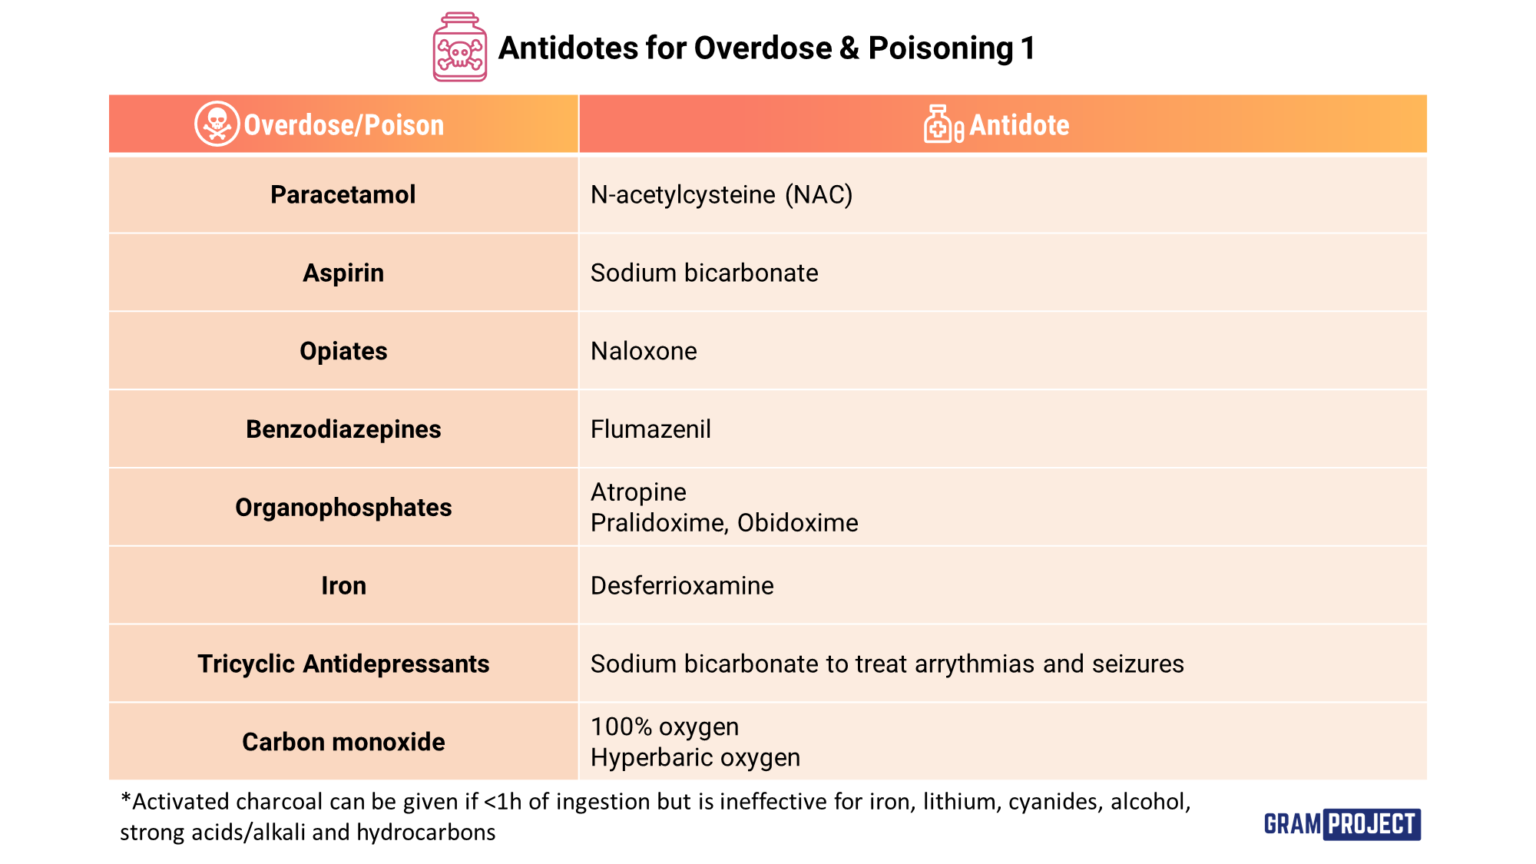 Summary table of Antidotes for Overdose and Poisoning